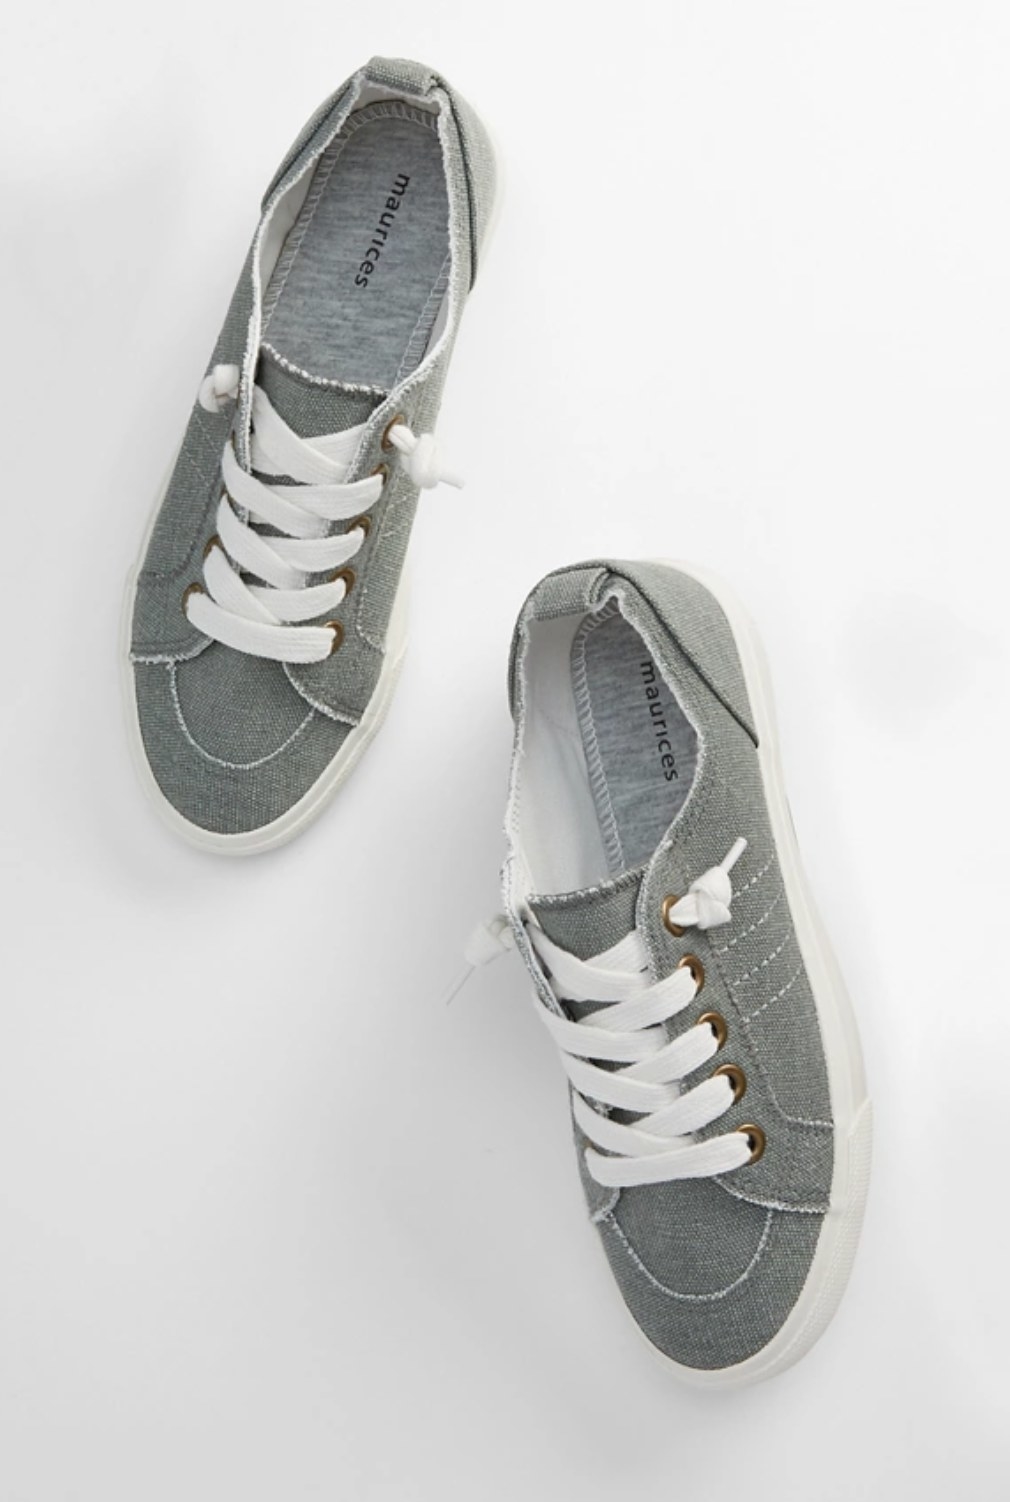 the gray sneakers with white laces